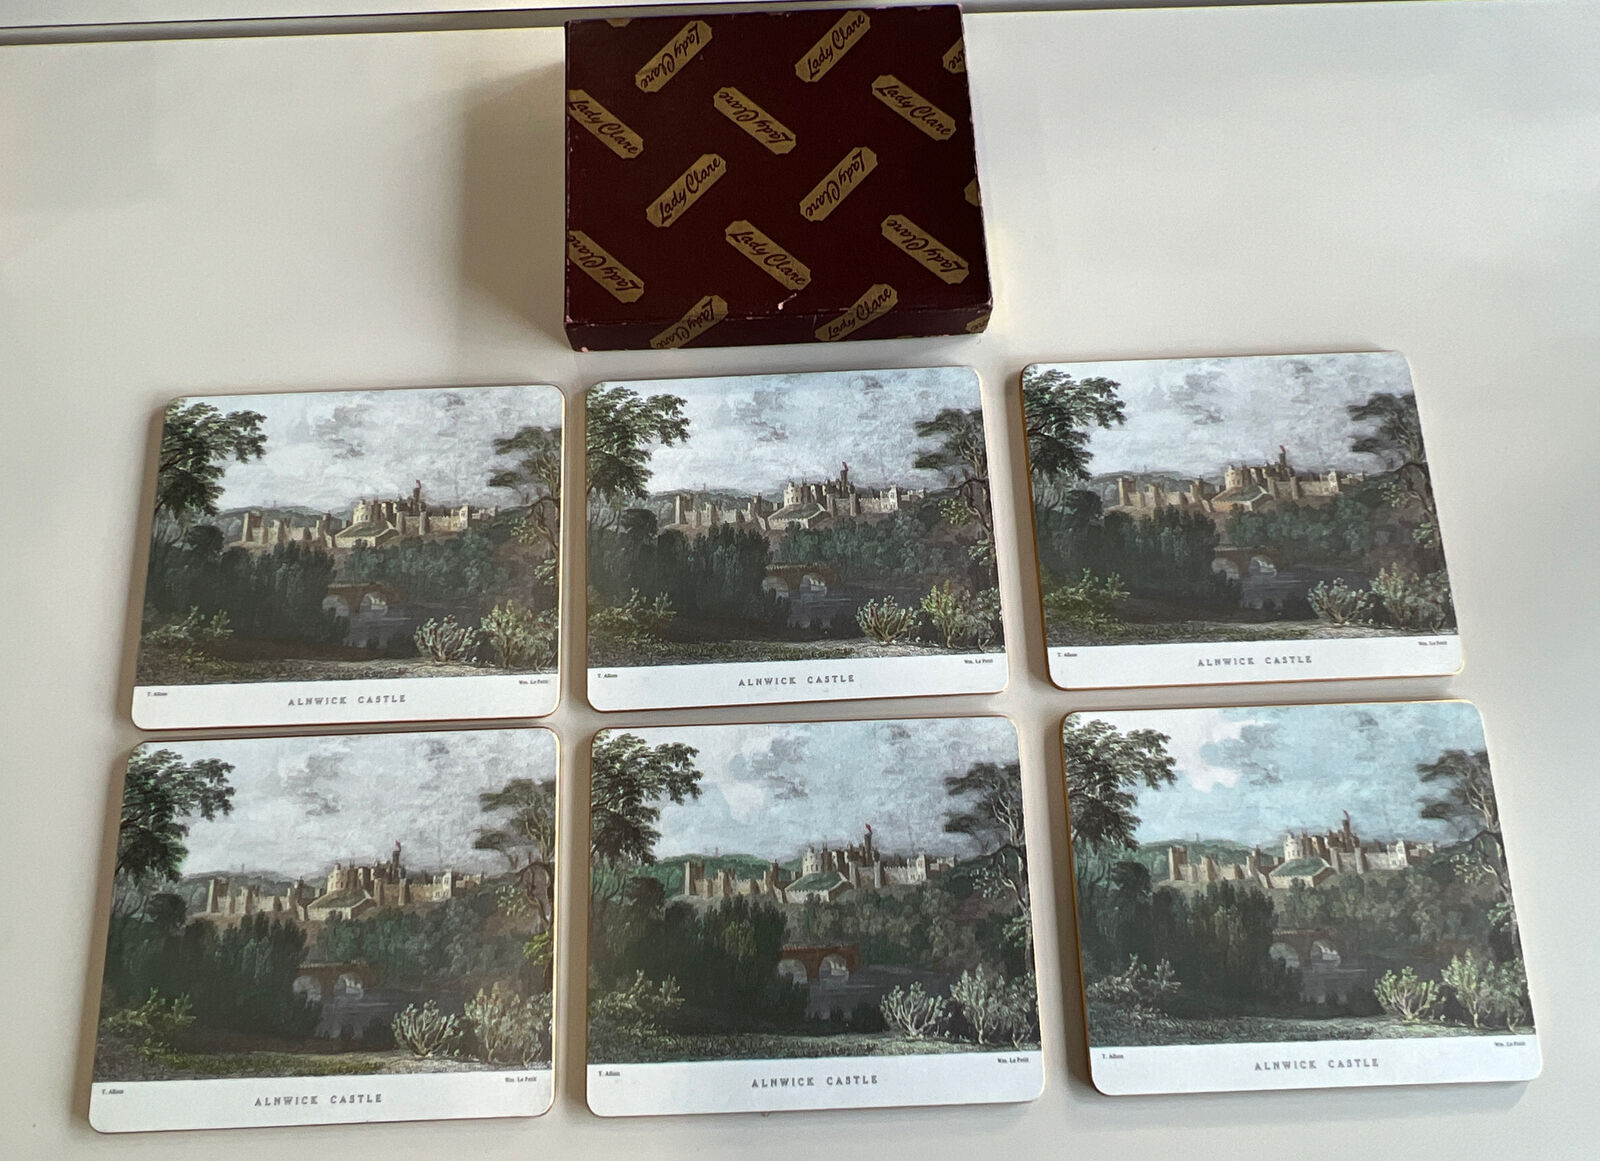 Lady Clare Alnwick Castle Hard Board Felt Back 9.5”x8” Placemats Set of 6 in Box